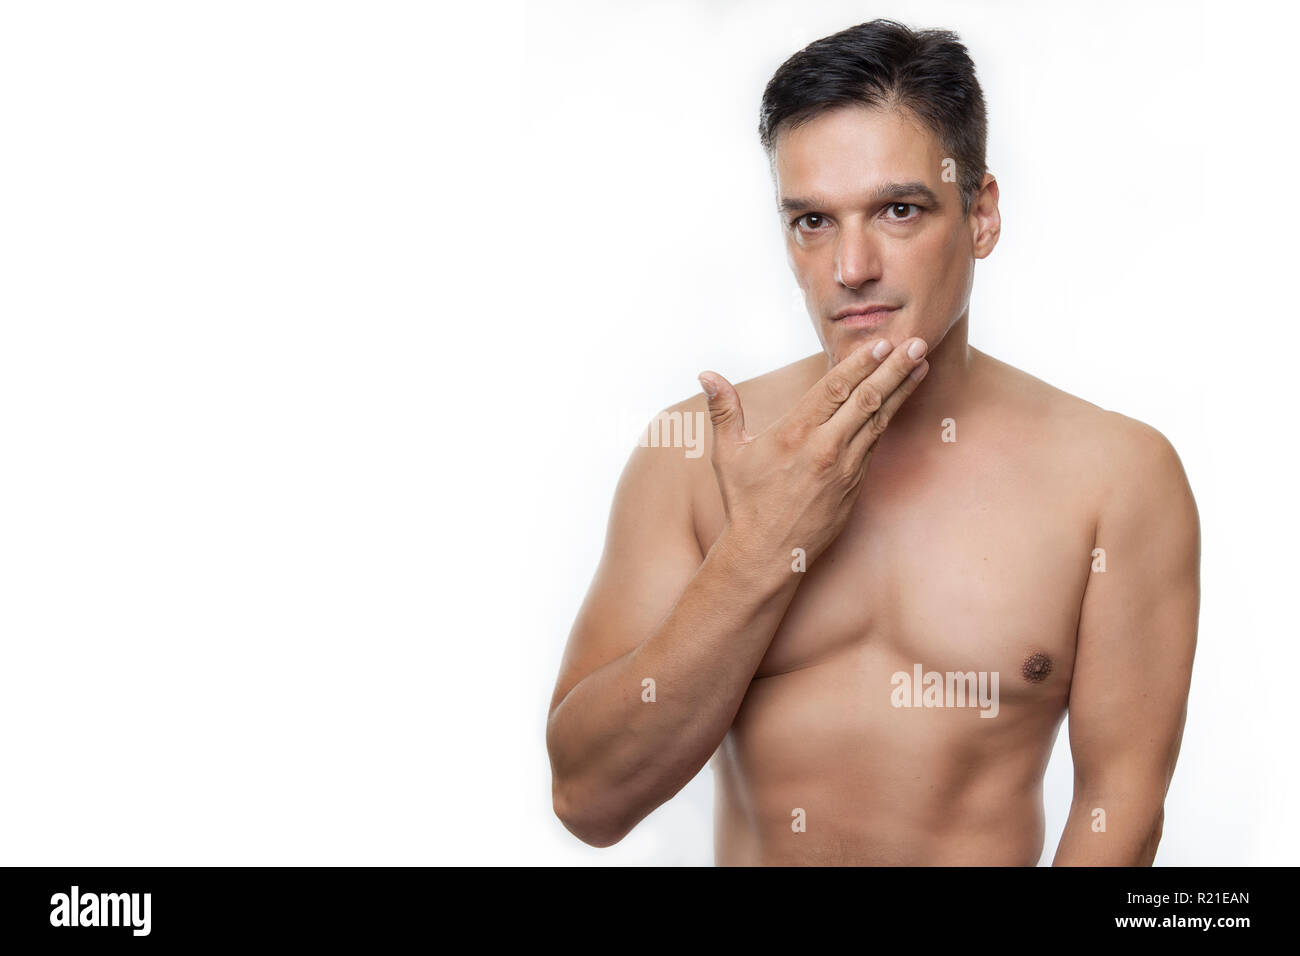 Shirtless young man with hand to chin against white background. Studio shot Stock Photo